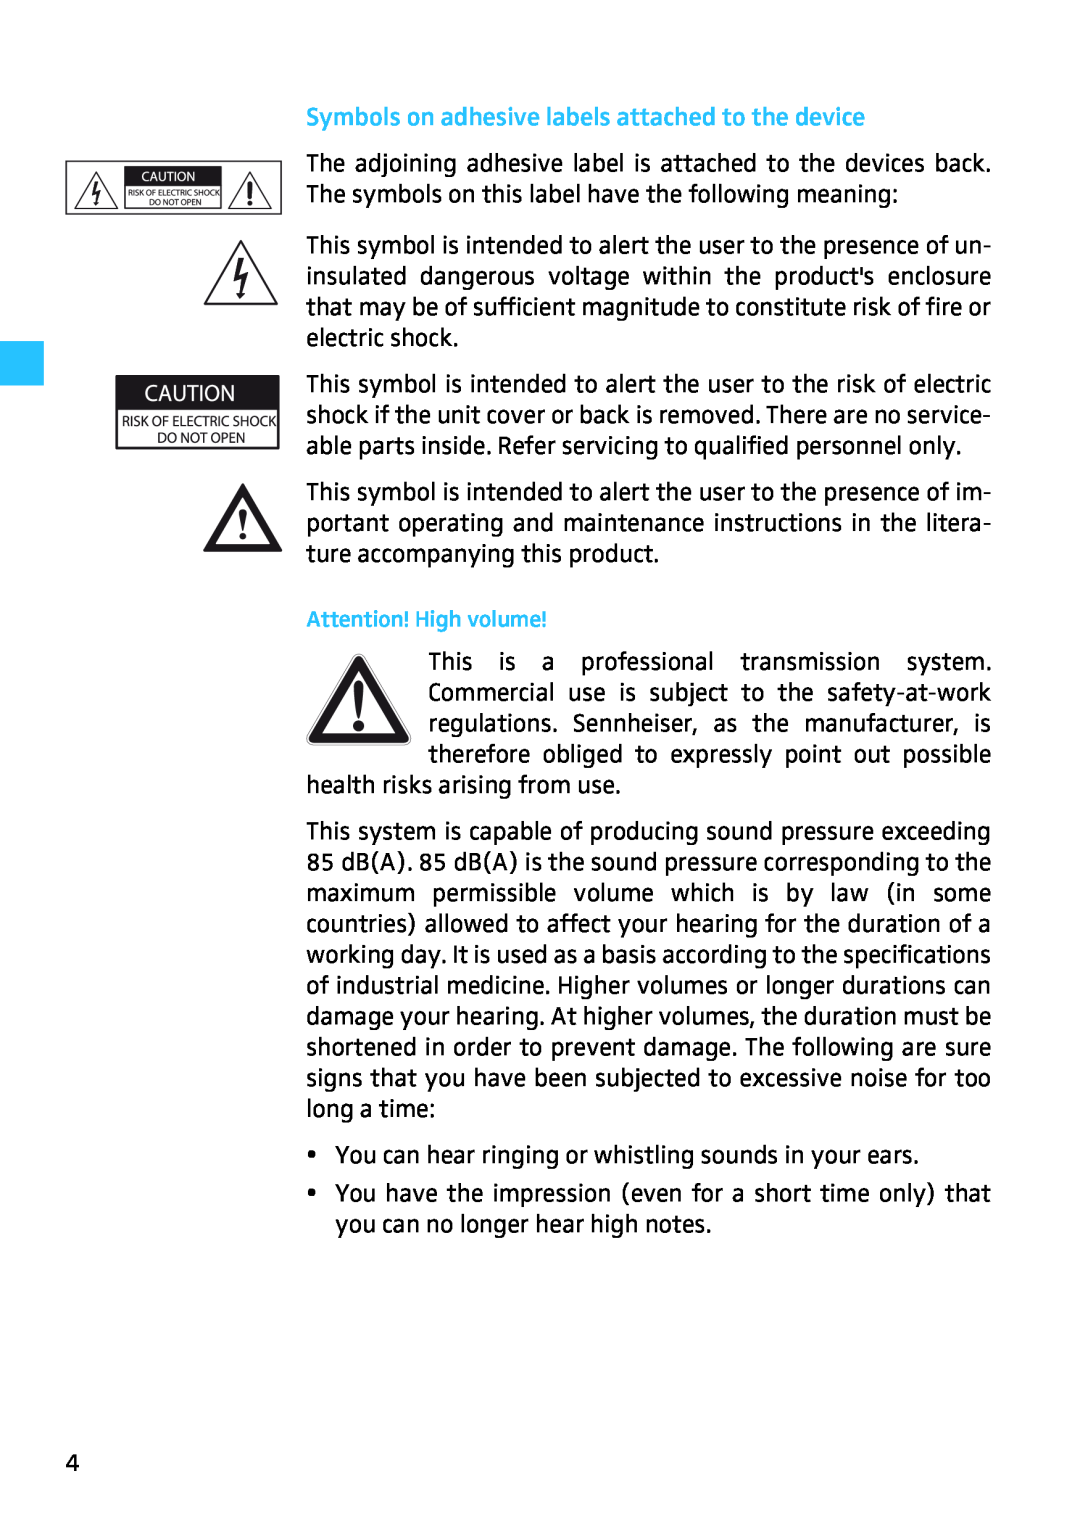 Sennheiser SR 3254, SR 3256 manual Symbols on adhesive labels attached to the device, health risks arising from use 